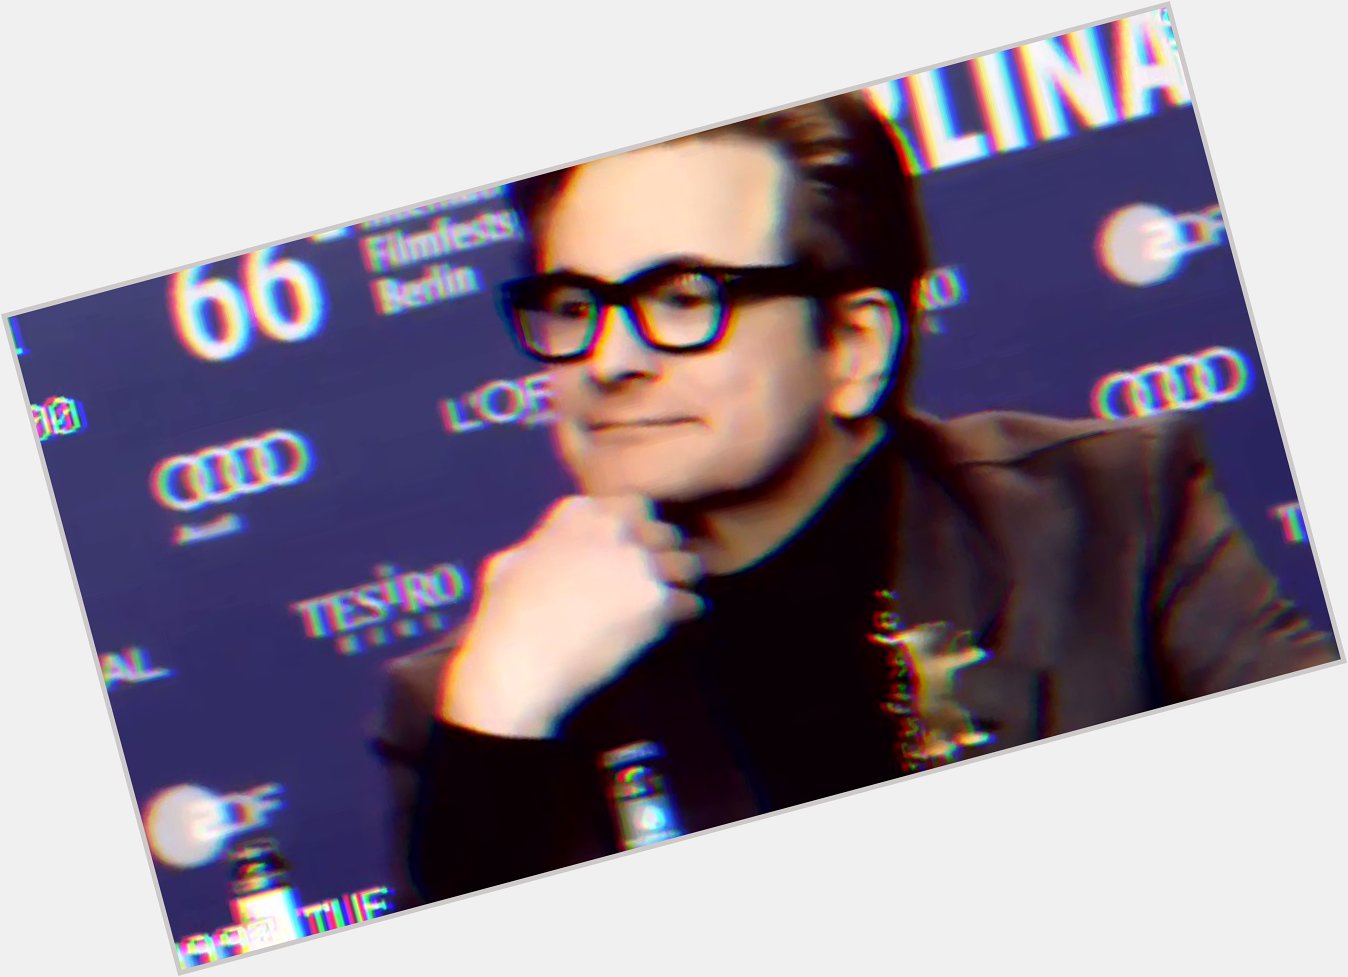 Happy birthday to the only man ever, colin firth is 60 y/o world nomination 